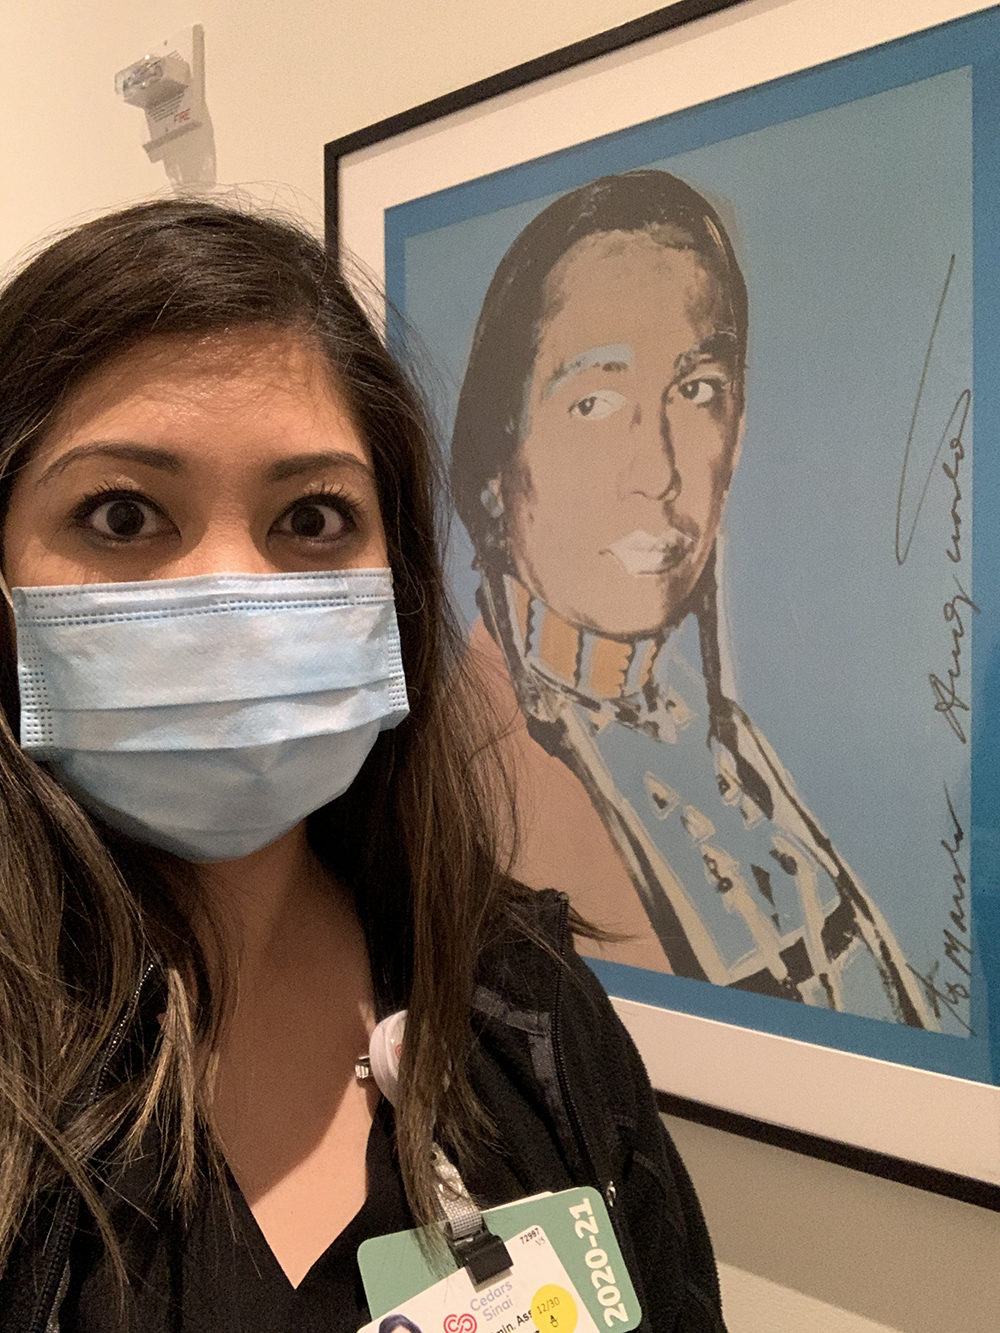 Christine J. Easterling, Lead Administrative Assistant of Capacity Management at Cedars-Sinai standing in front of Andy Warhol's art piece.